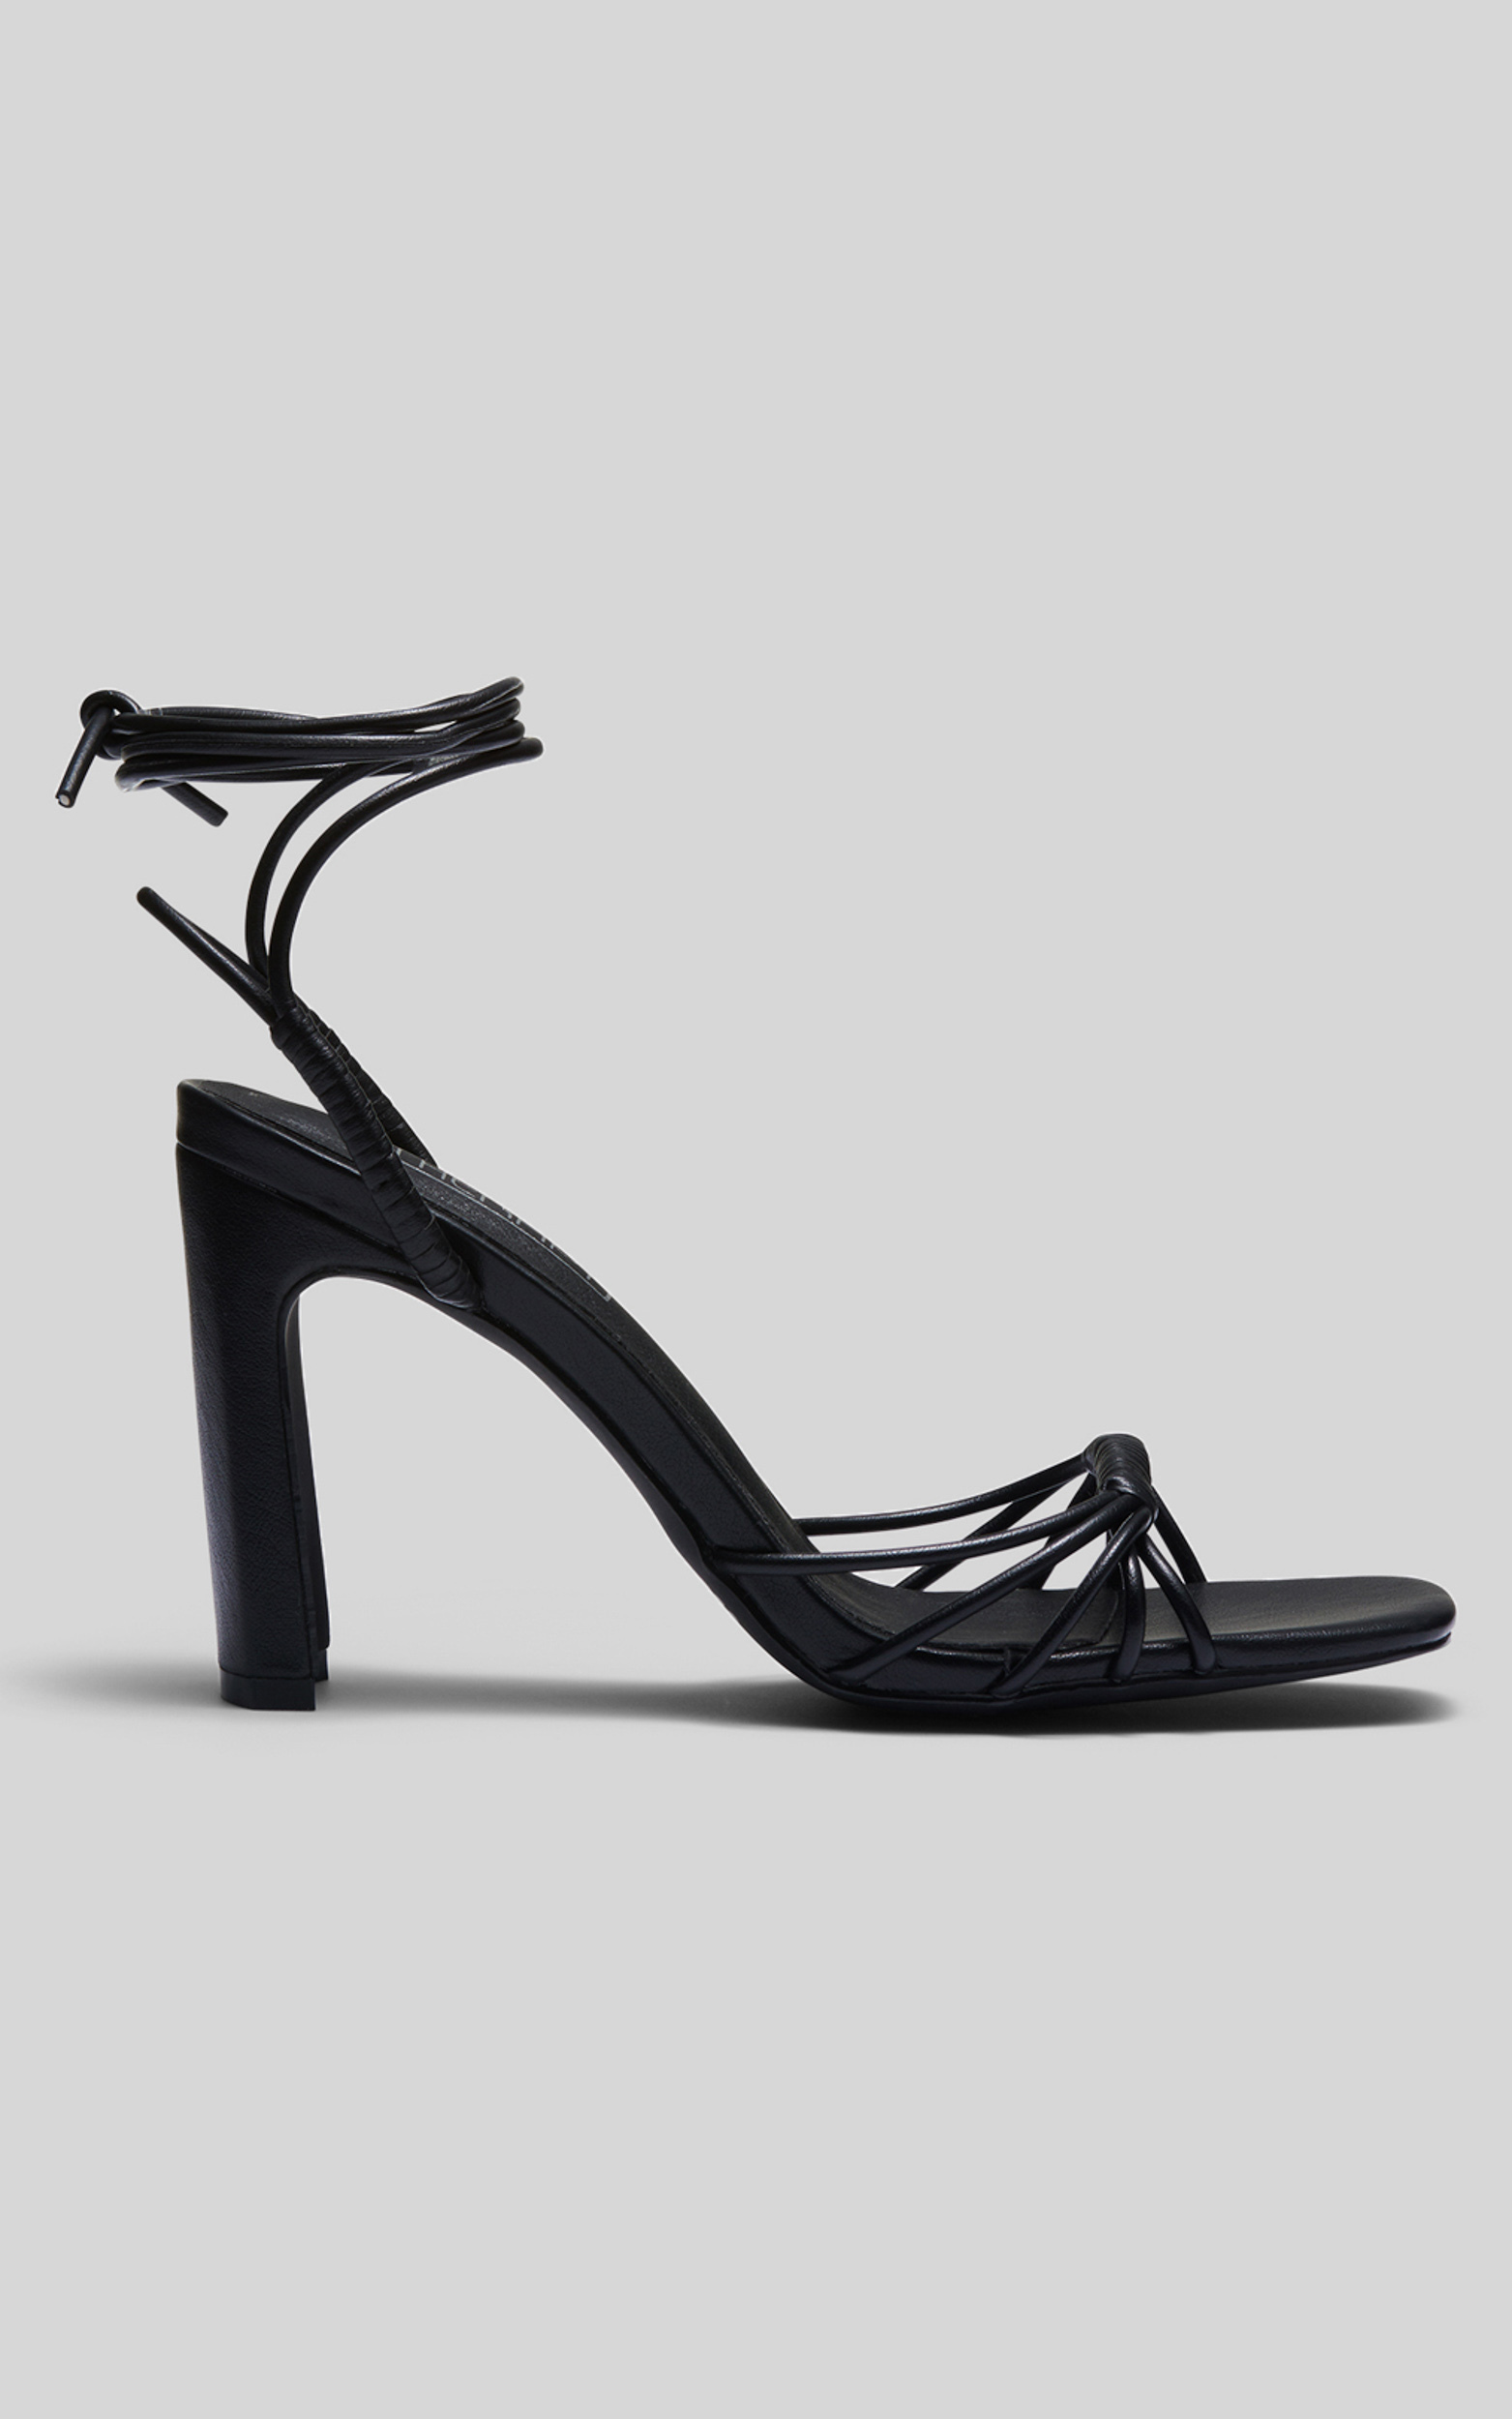 Therapy - Bexley Heels in Black - 05, BLK1, hi-res image number null